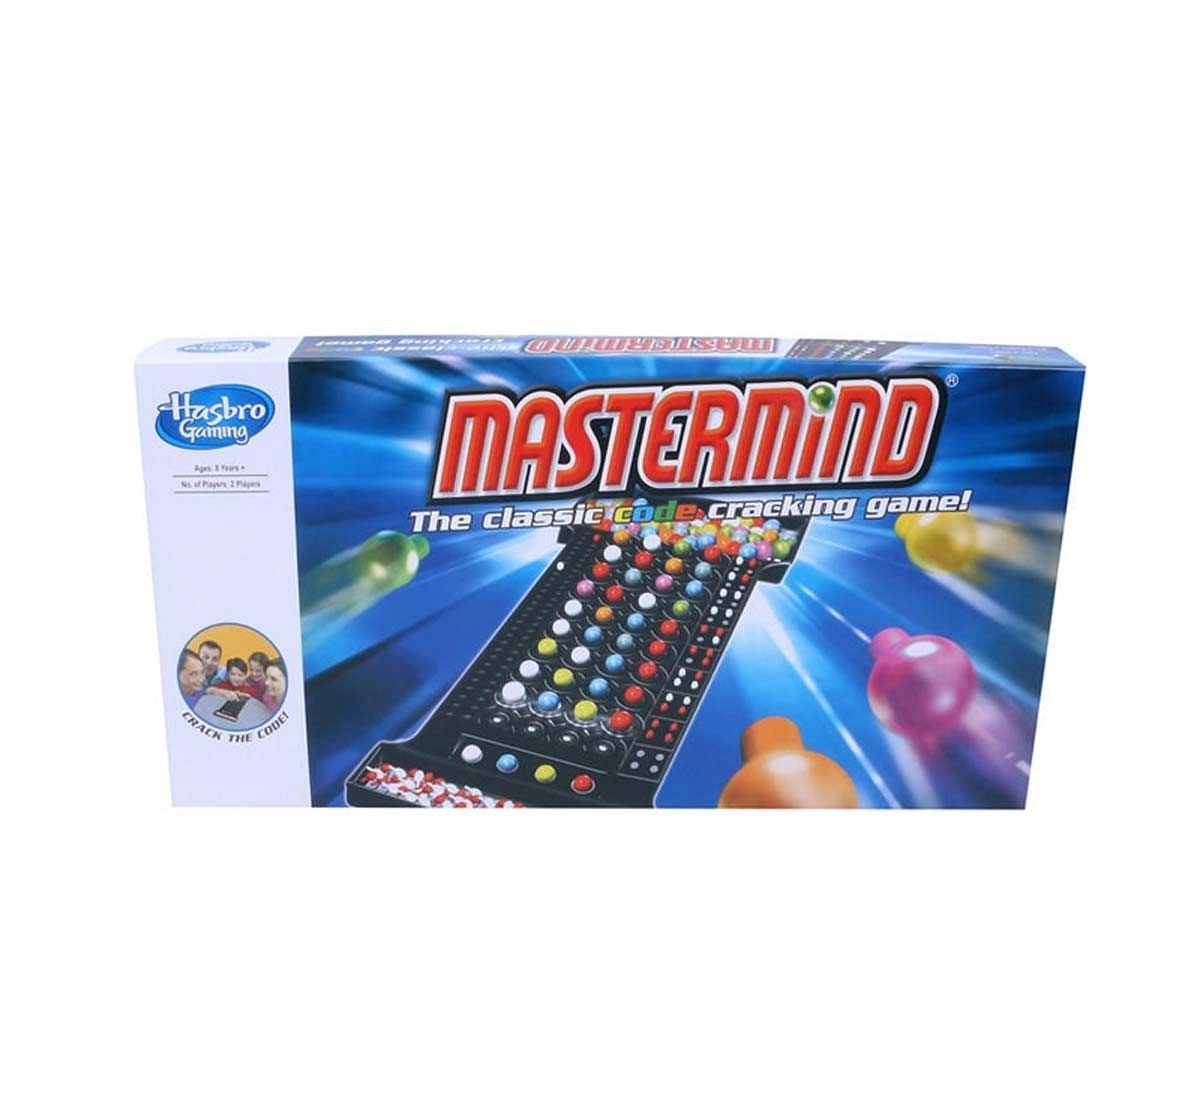 Hasbro Mastermind The Classic Code Cracking Game Games for Kids Age 8Y+